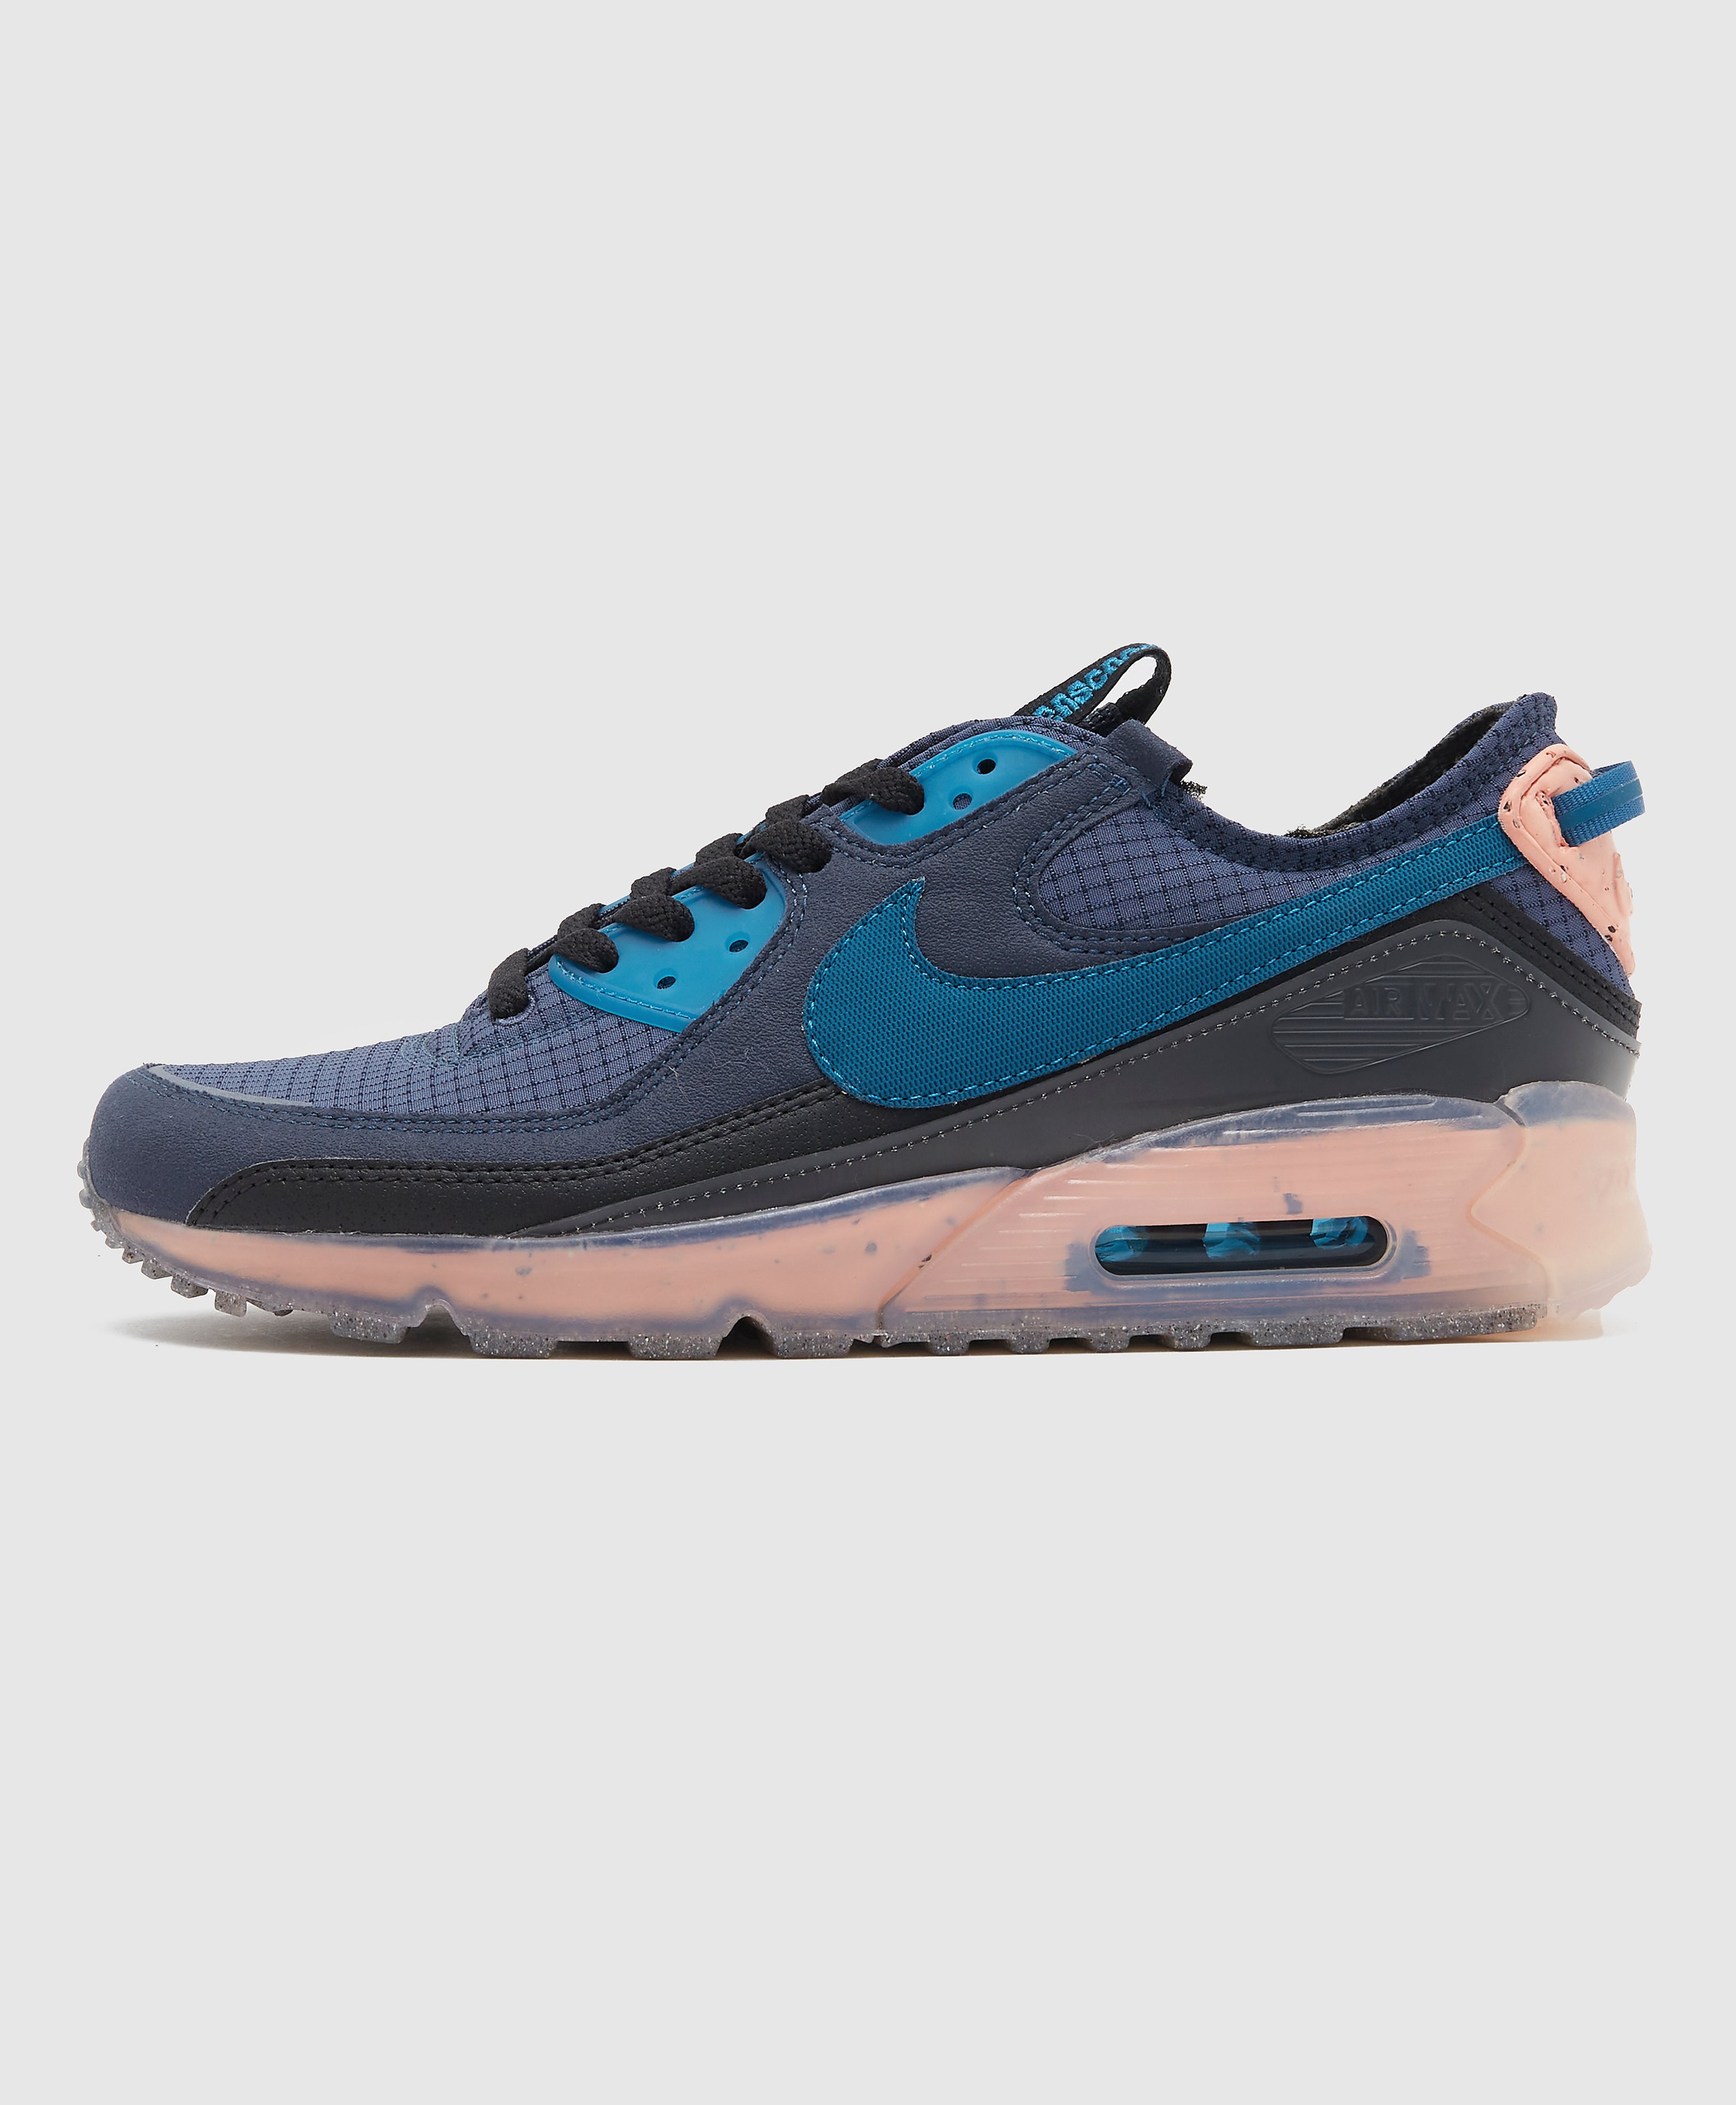 Nike Men's Air Max 90 Terrascape Trainers - Blue/Pink, Blue/Pink